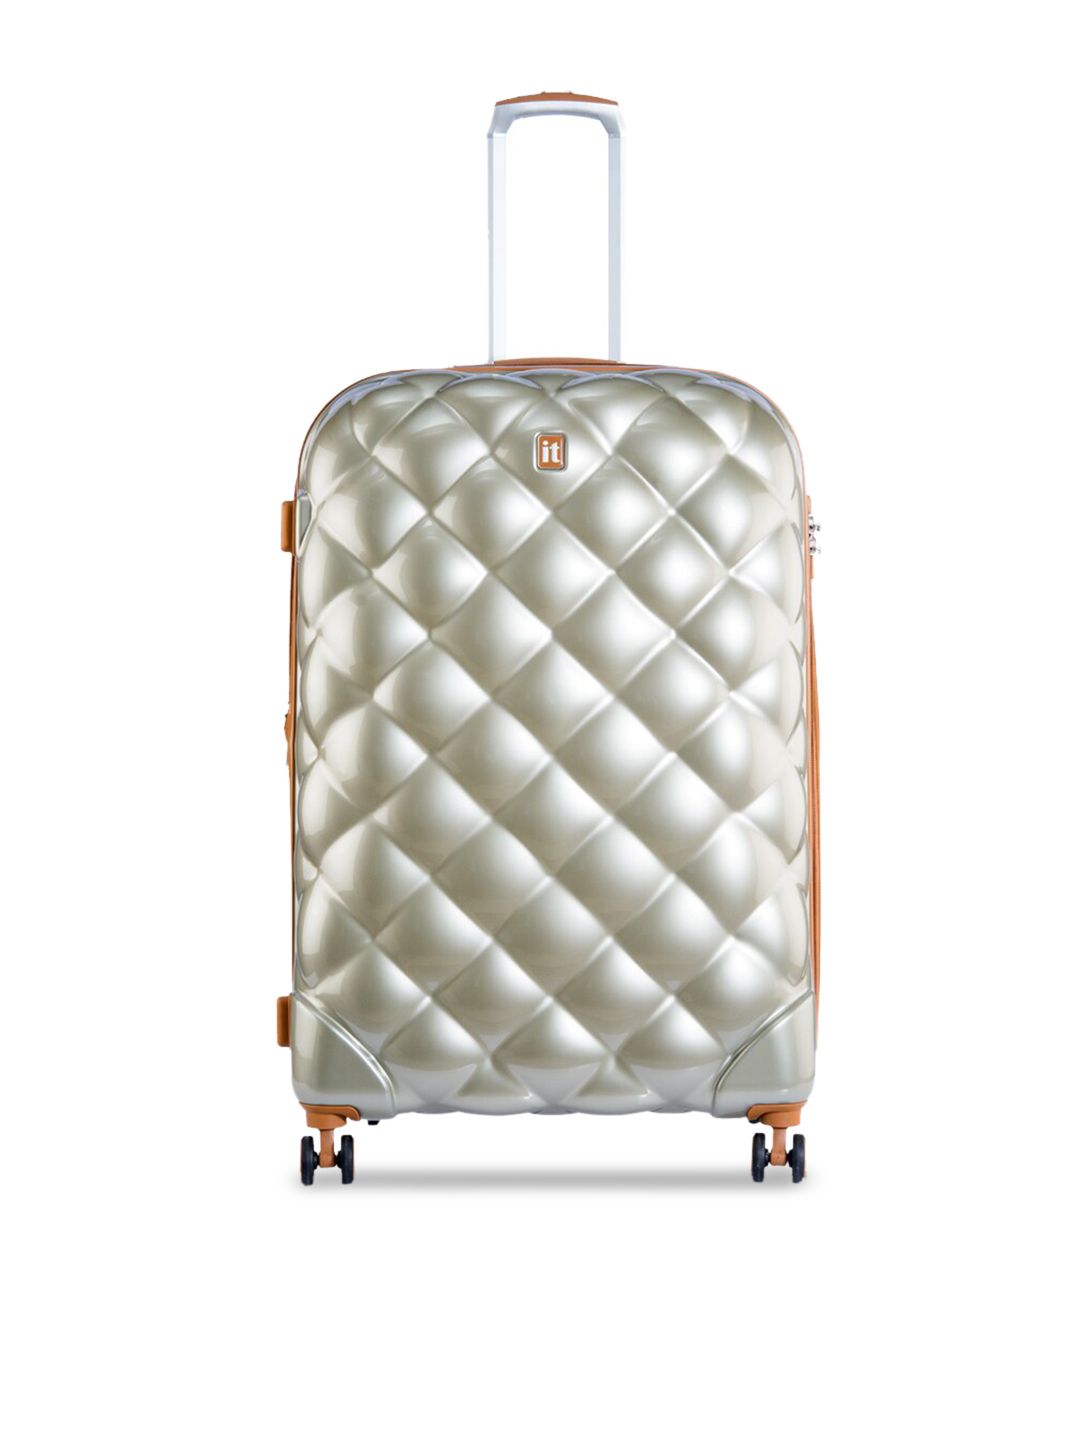 IT luggage Champagne-Toned Textured Hard-Sided Large Trolley Bag Price in India